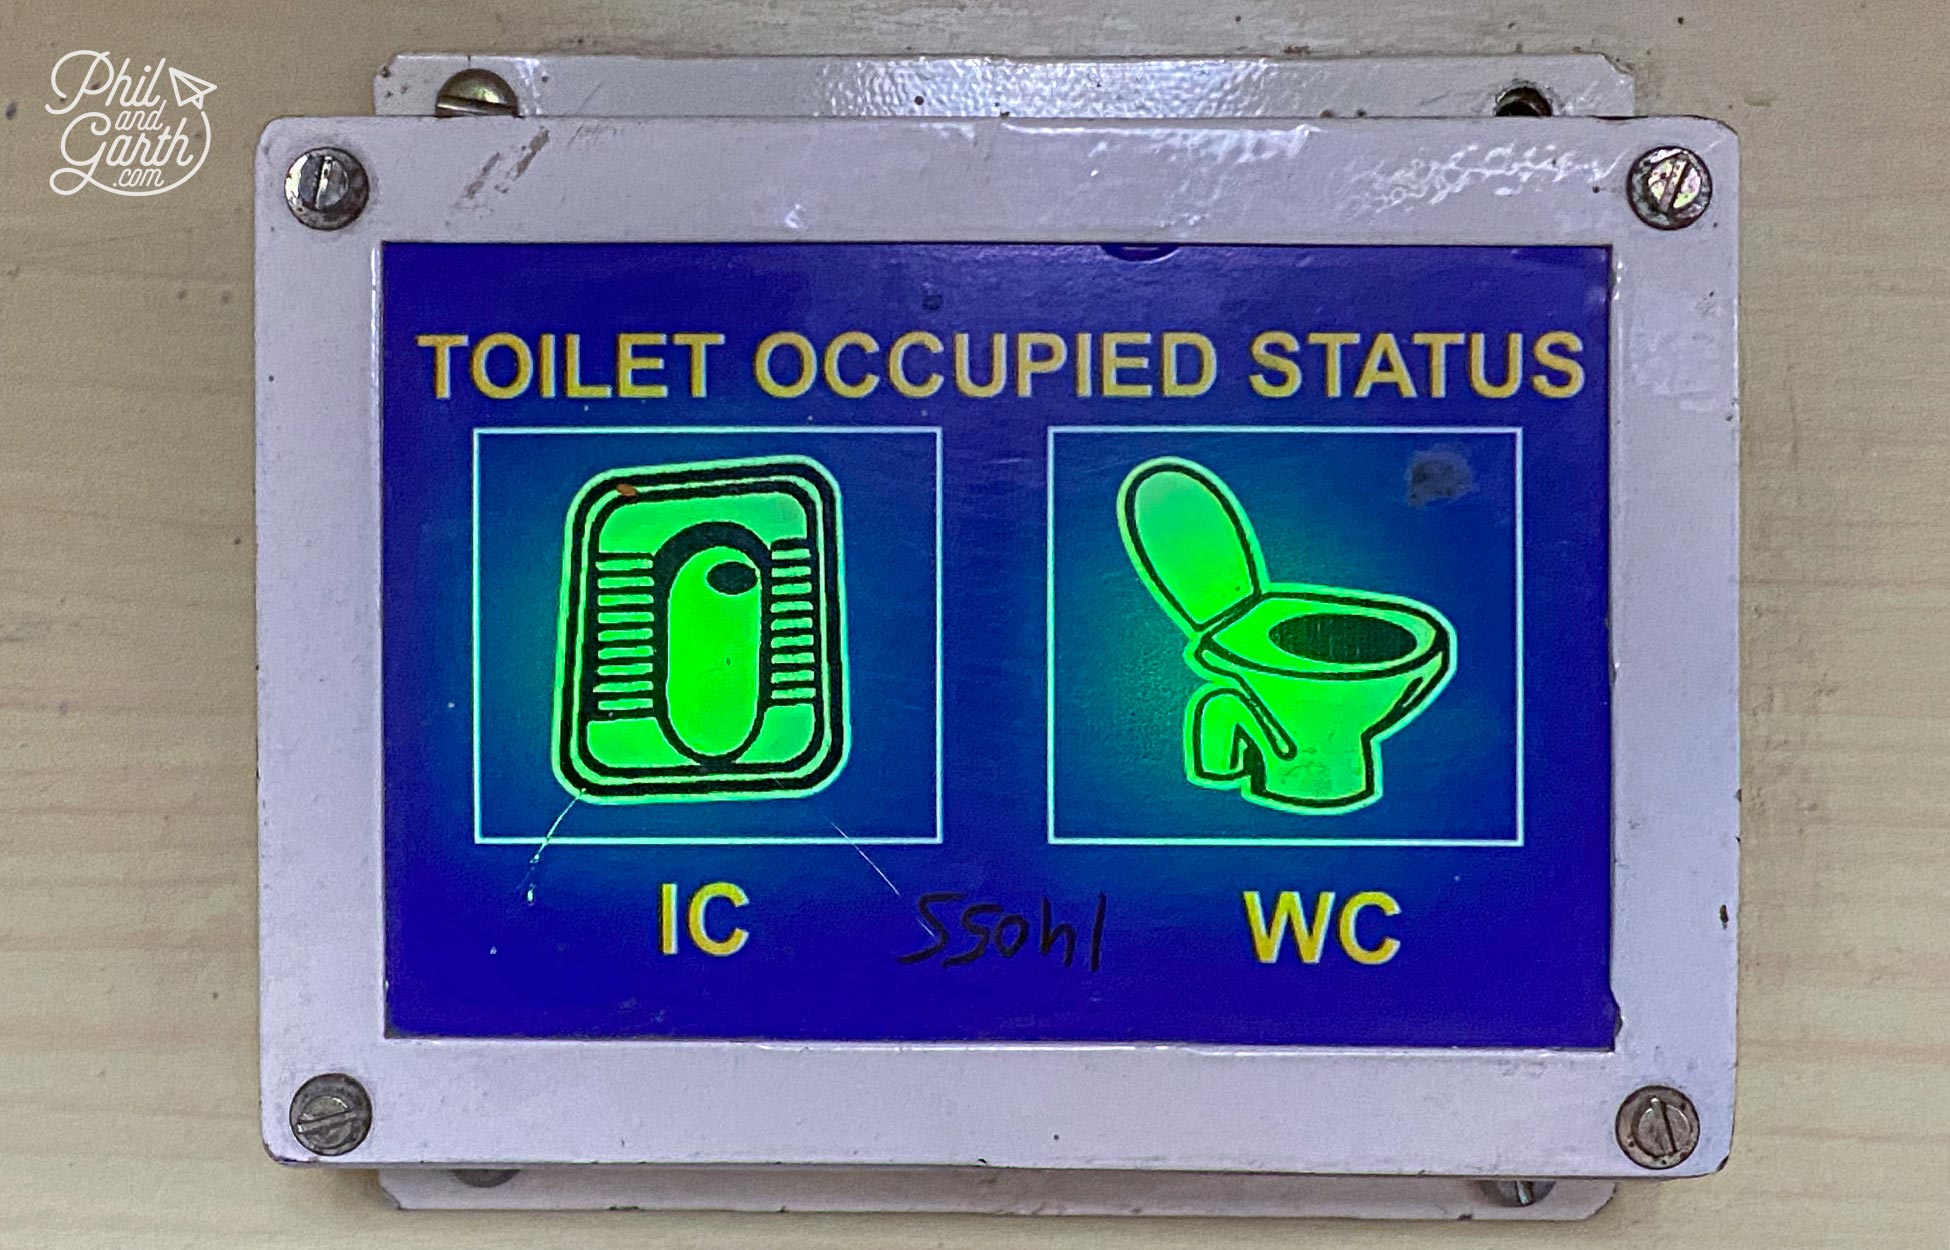 Toilet signs inside the carriages tell you if they are occupied like on an airplane